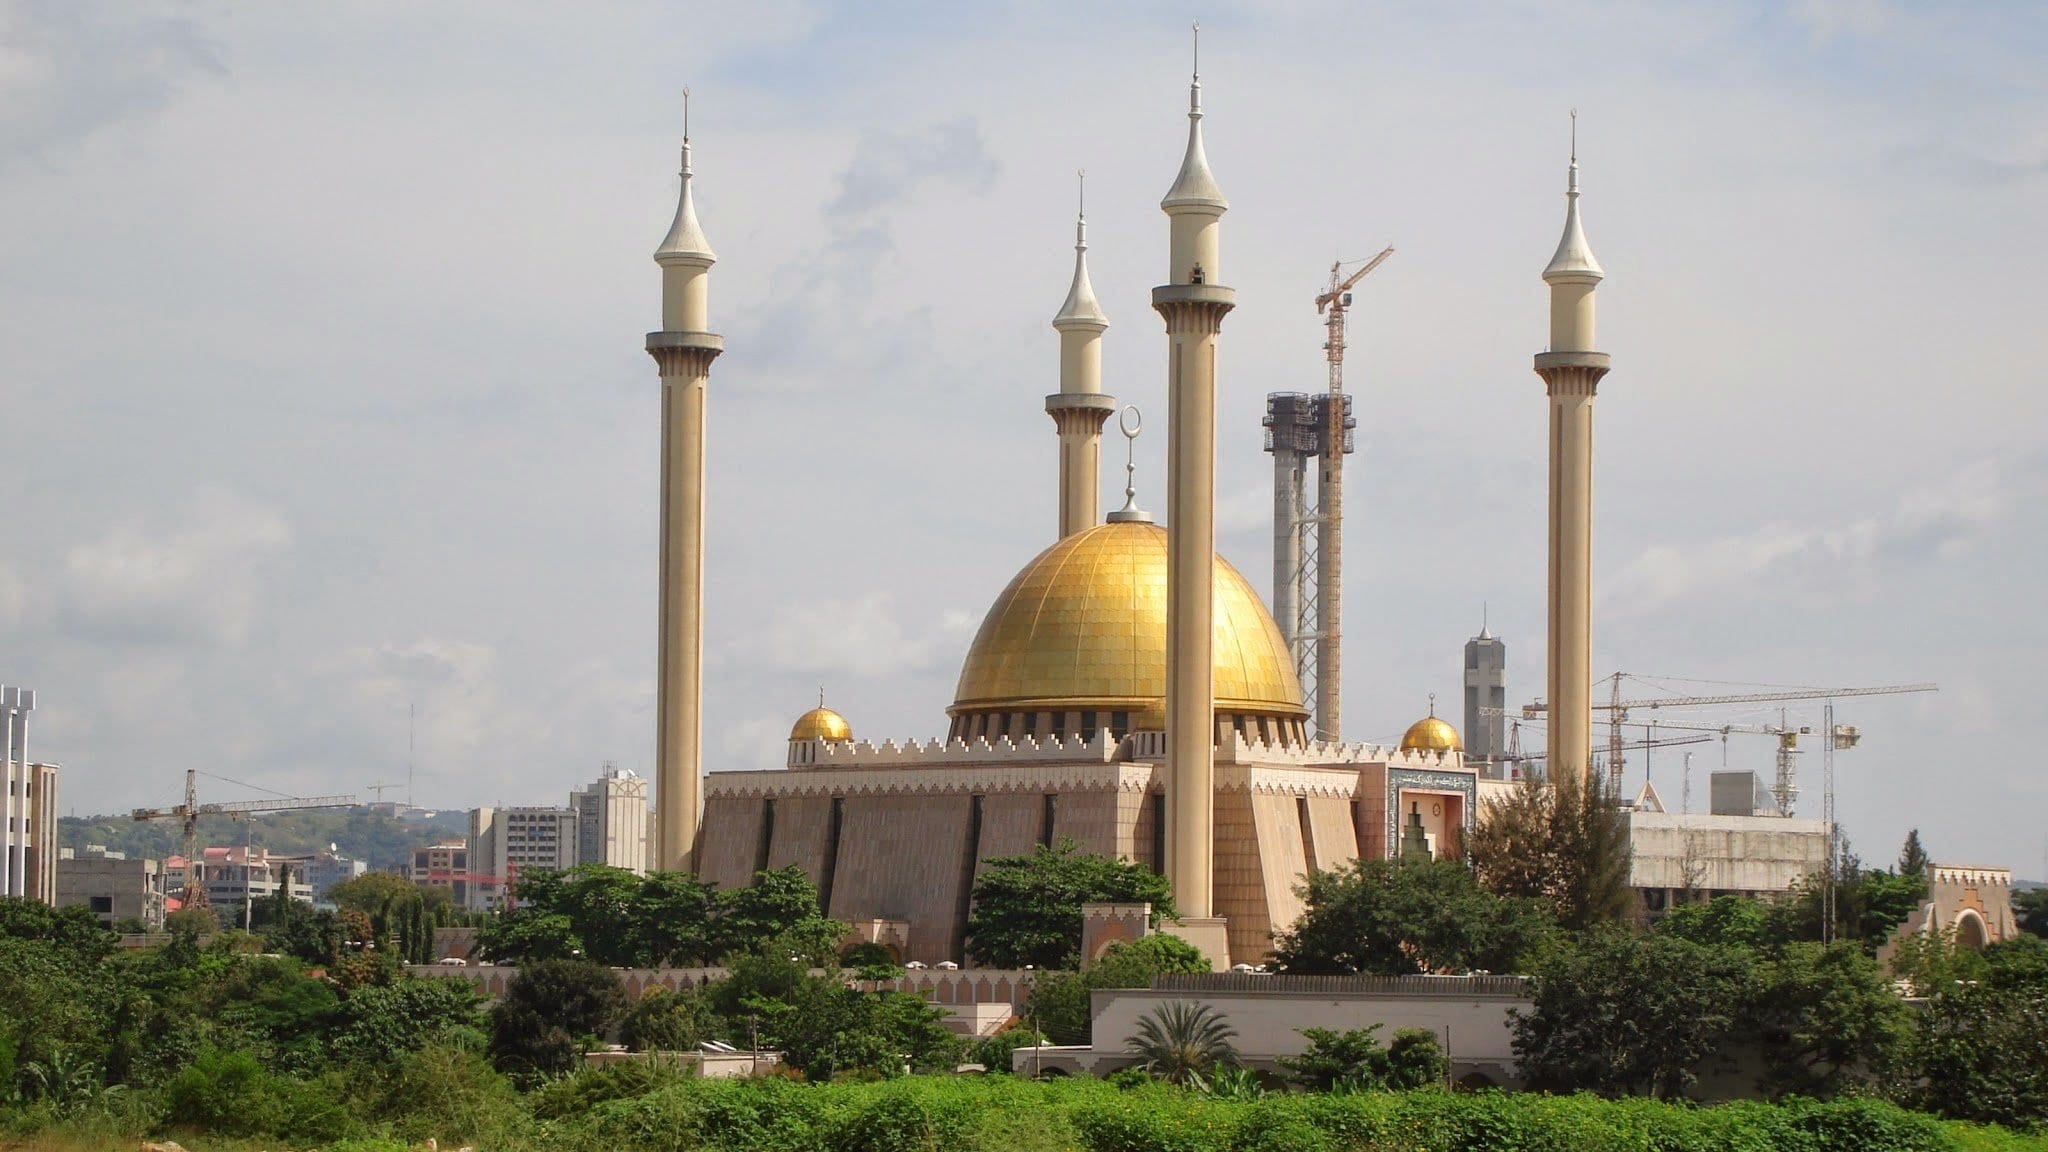 Abuja National Mosque beautiful mosques in Africa